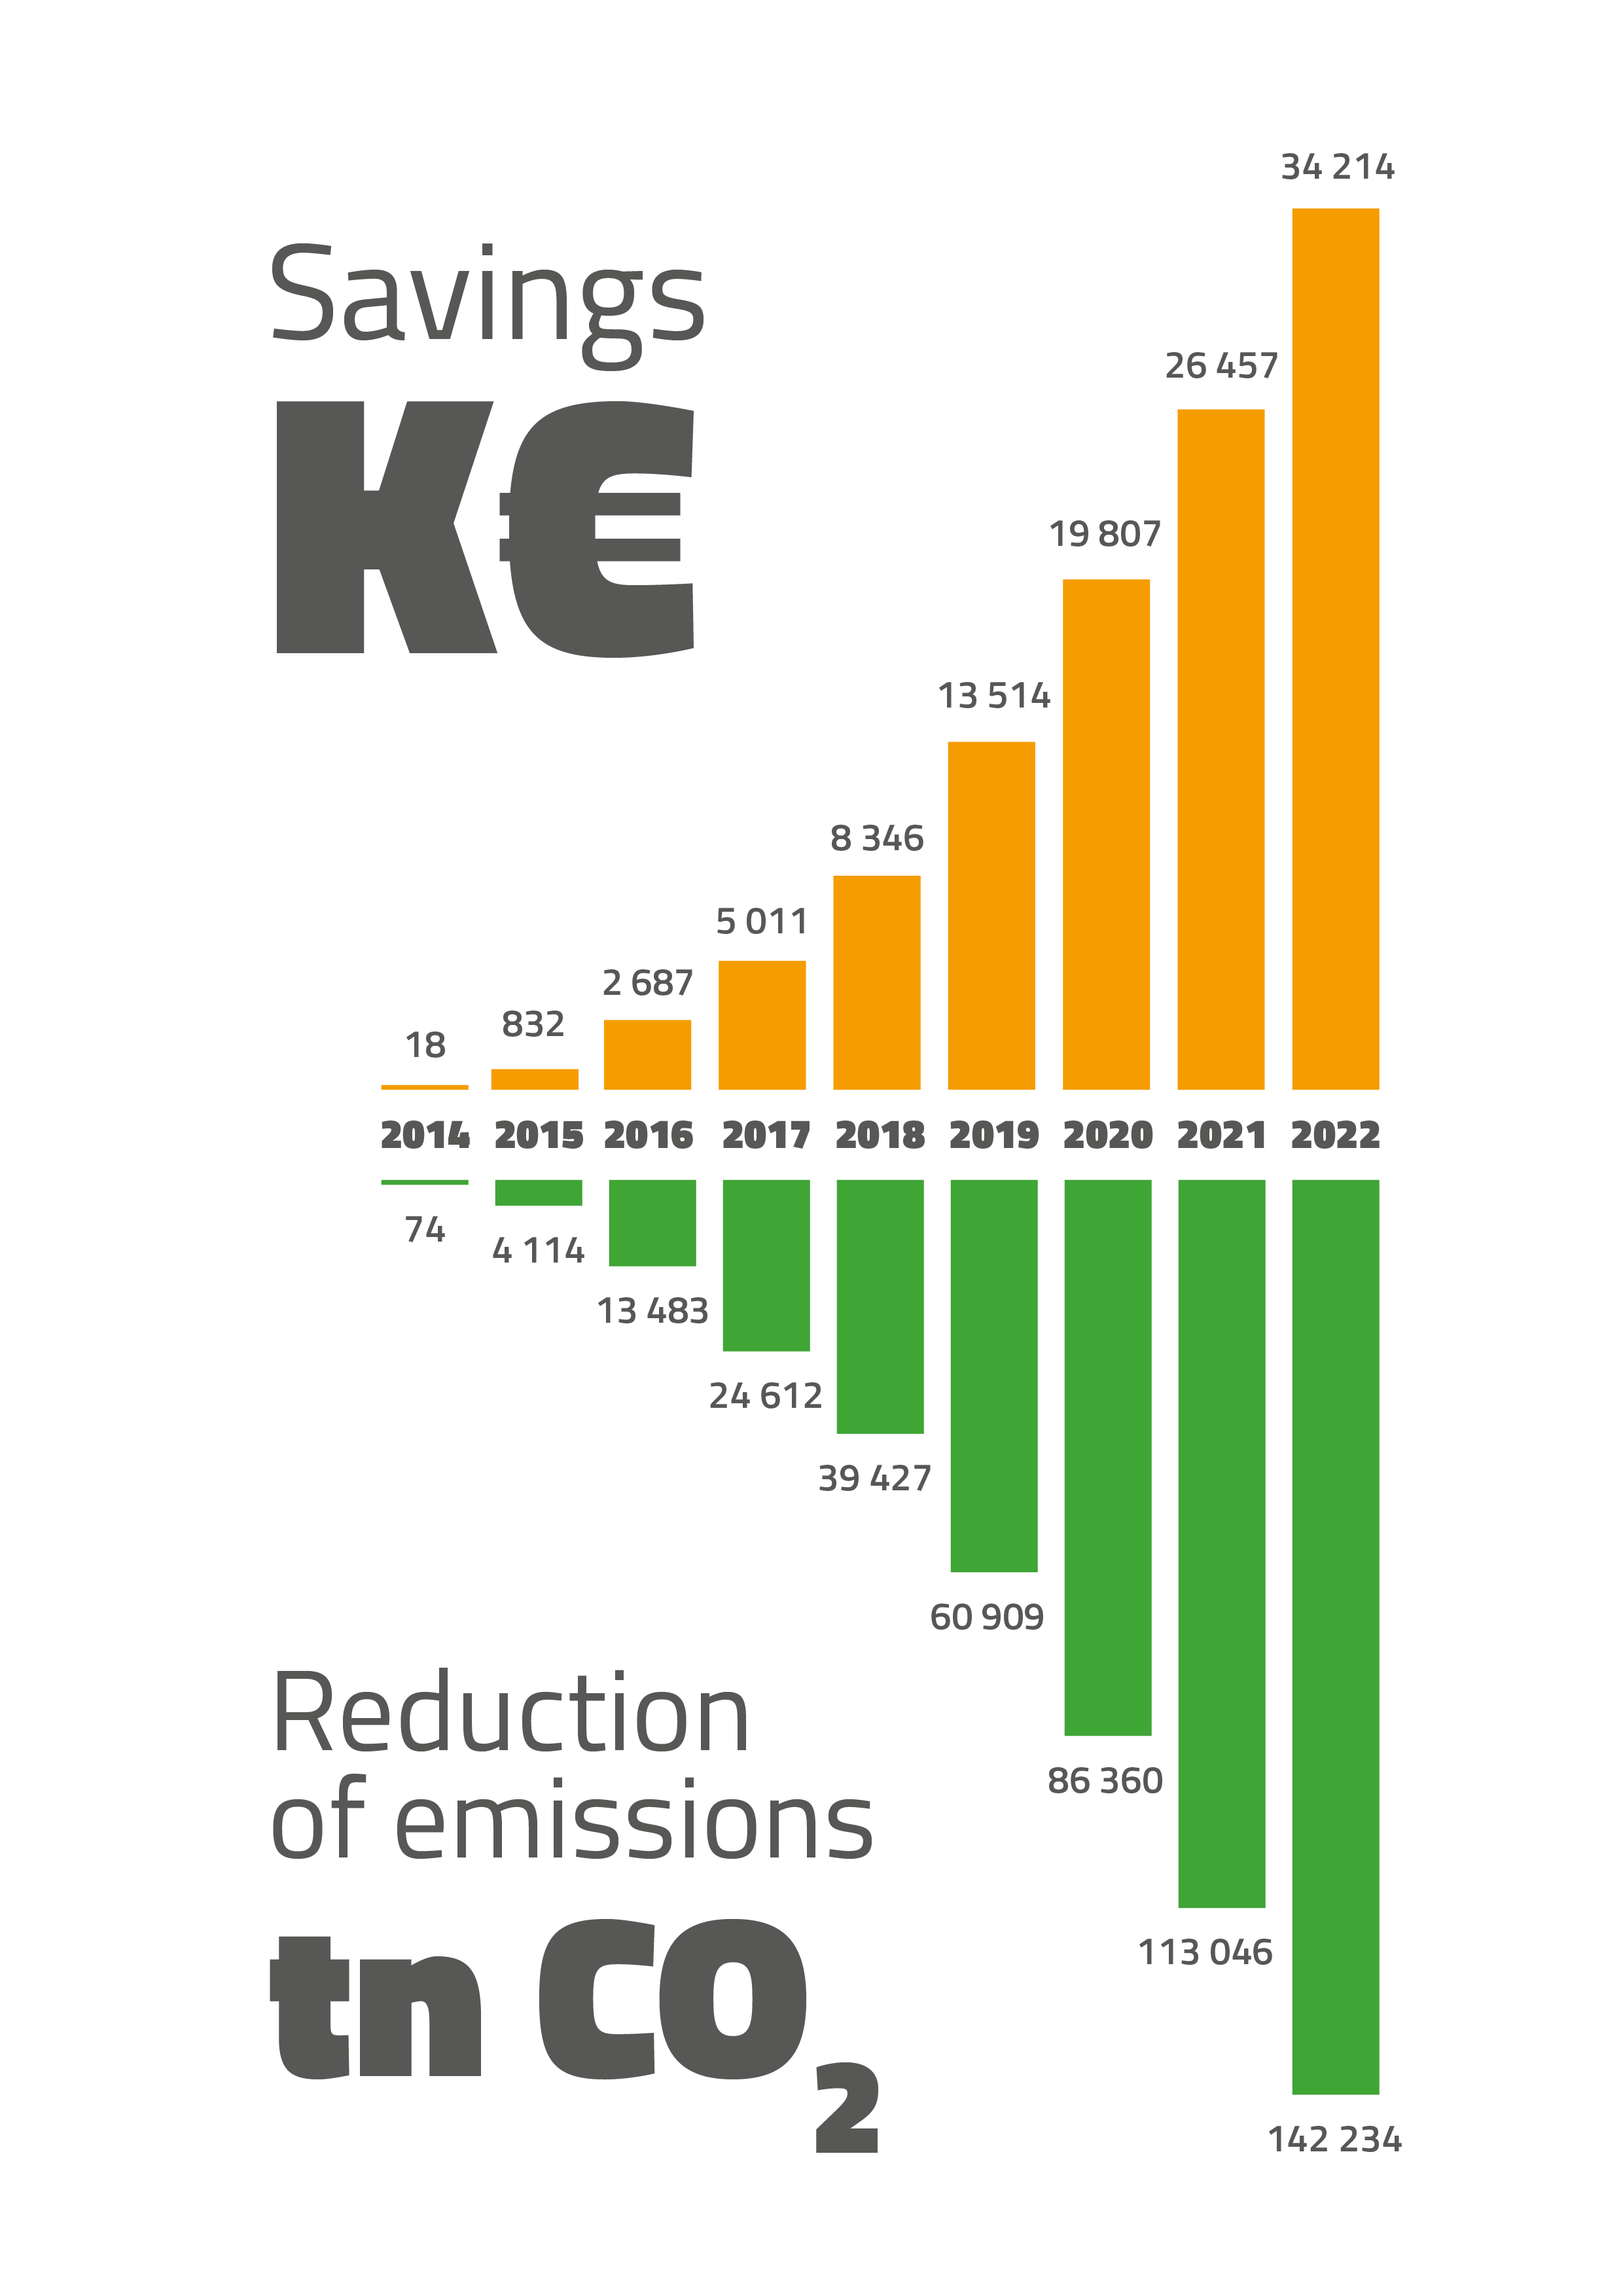 Savings & Reduction of emissions 2013-2022